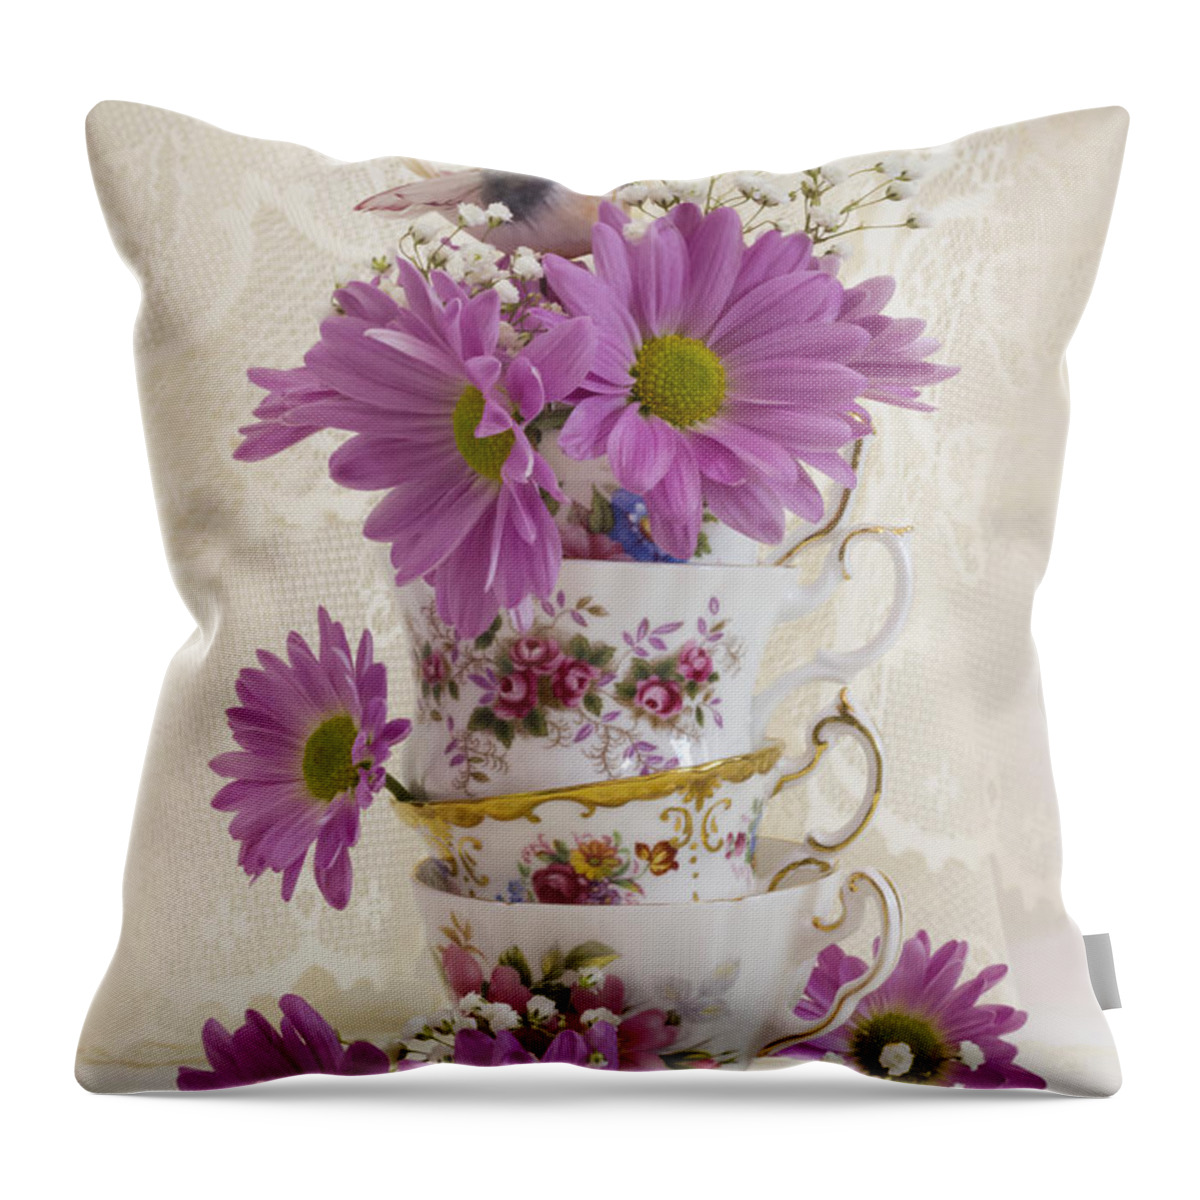 Tea Cups And Daisies Still Life Throw Pillow featuring the photograph Tea Cups And Daisies by Sandra Foster